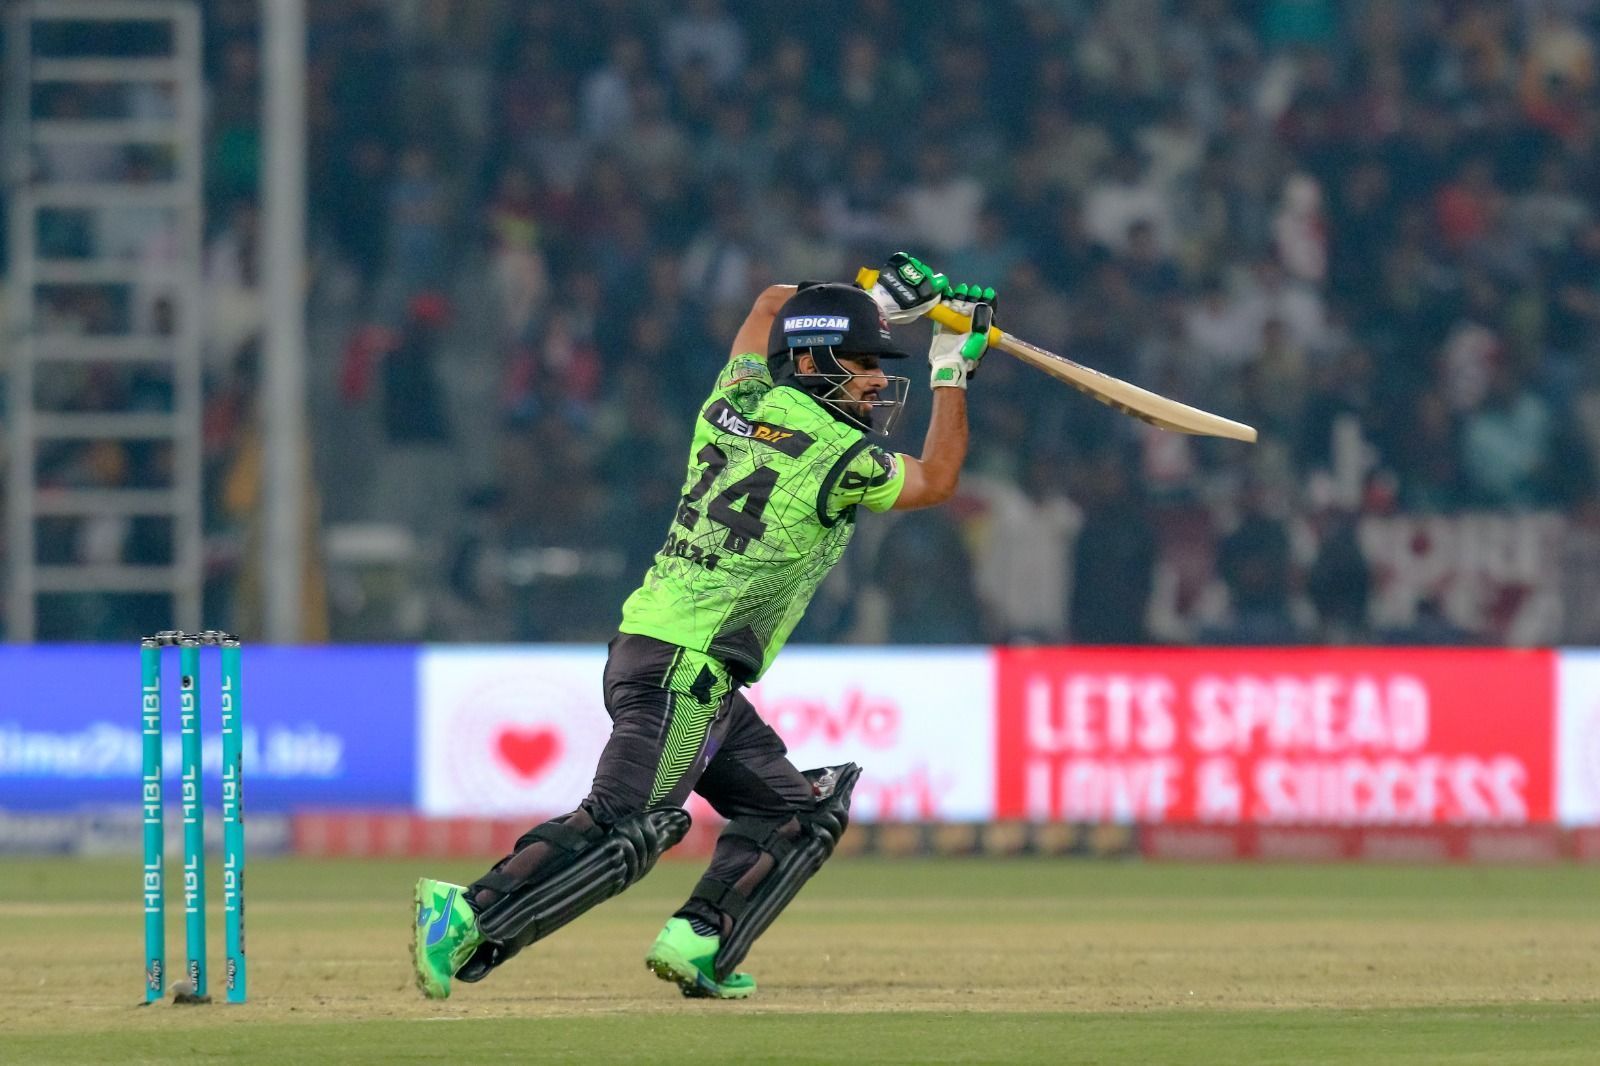 Can Lahore Qalandars win another PSL trophy? (Image: Twitter)